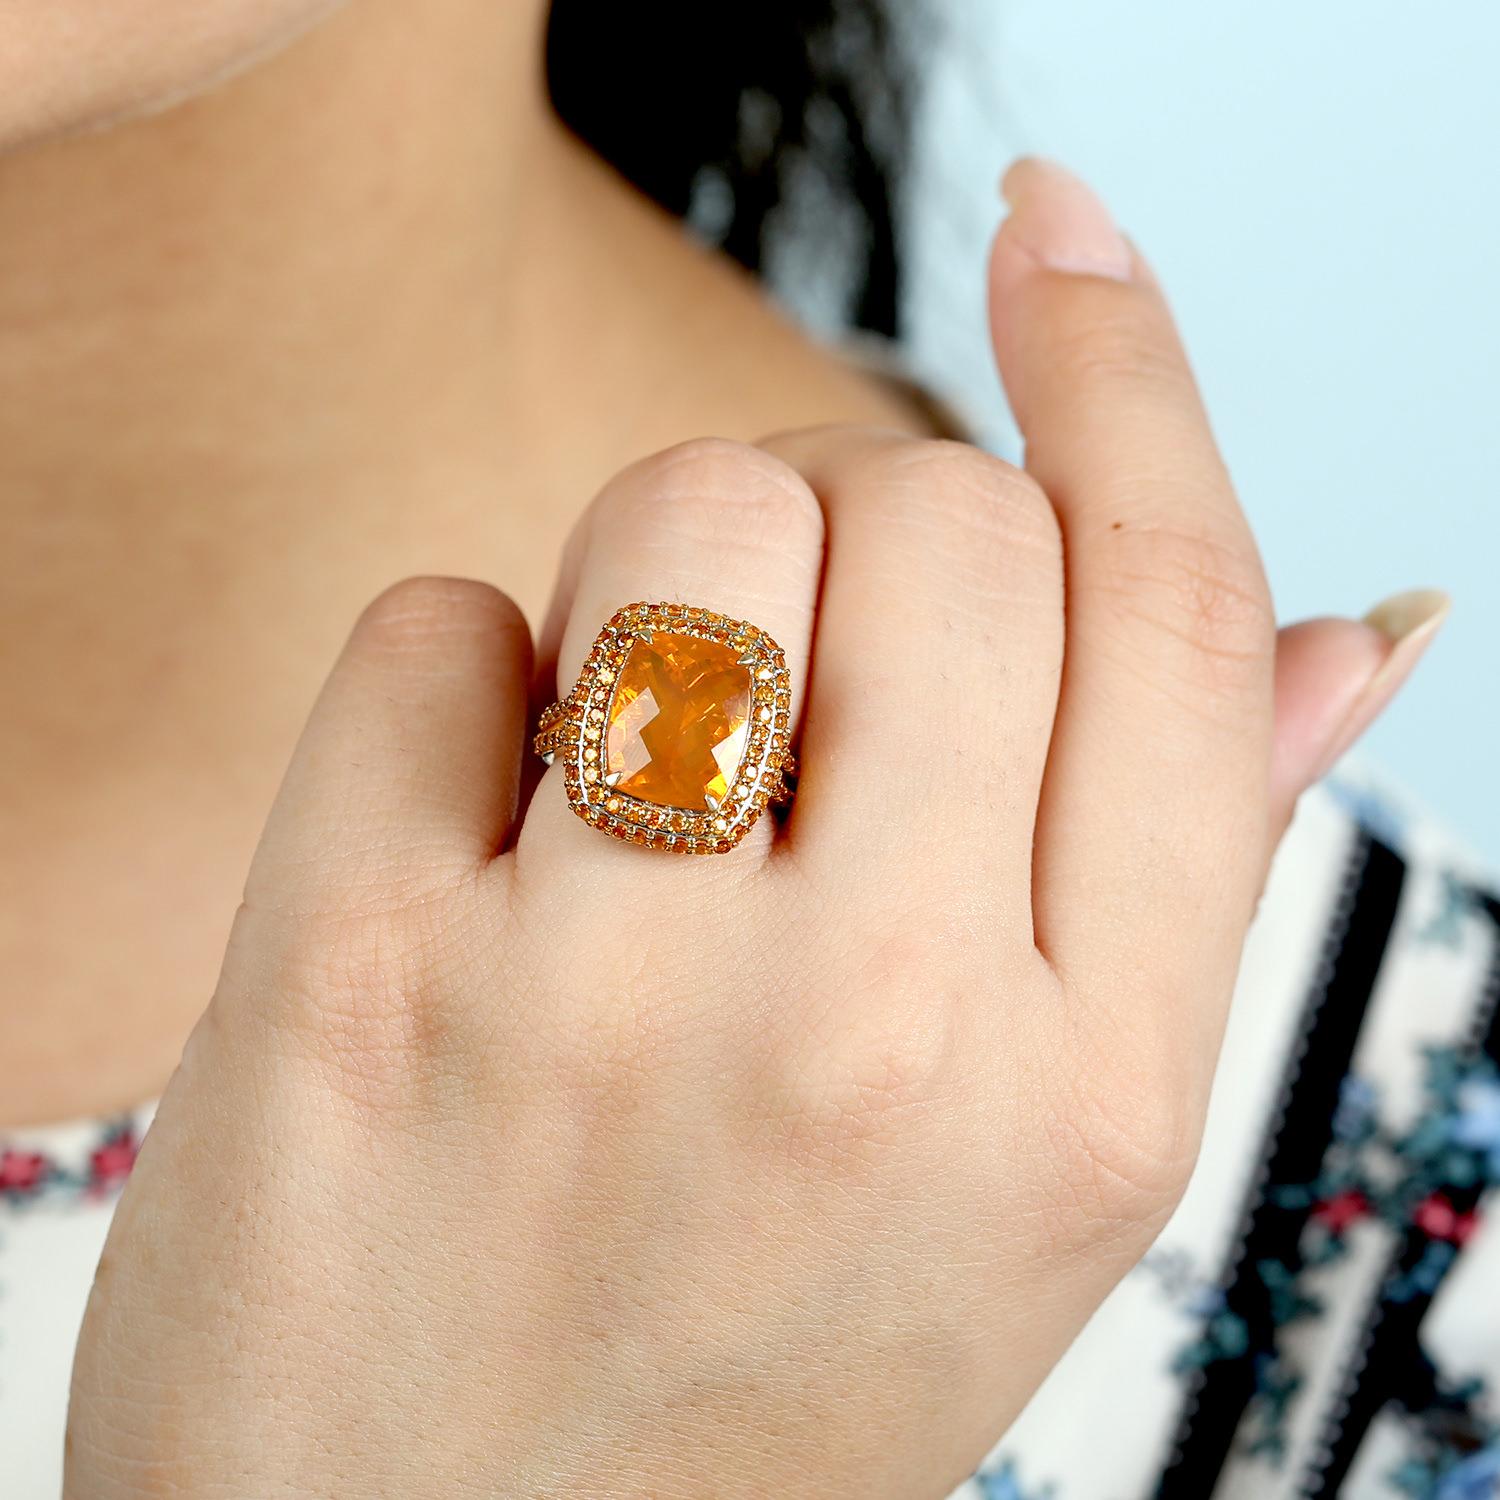 It comes with the Gemological Appraisal by GIA GG/AJP
All Gemstones are Natural
Fire Opal = 6.32 Carats
Orange Garnets = 2.83 Carats
Metal: 18K Yellow Gold
Ring Size: 7* US
*It can be resized complimentary
